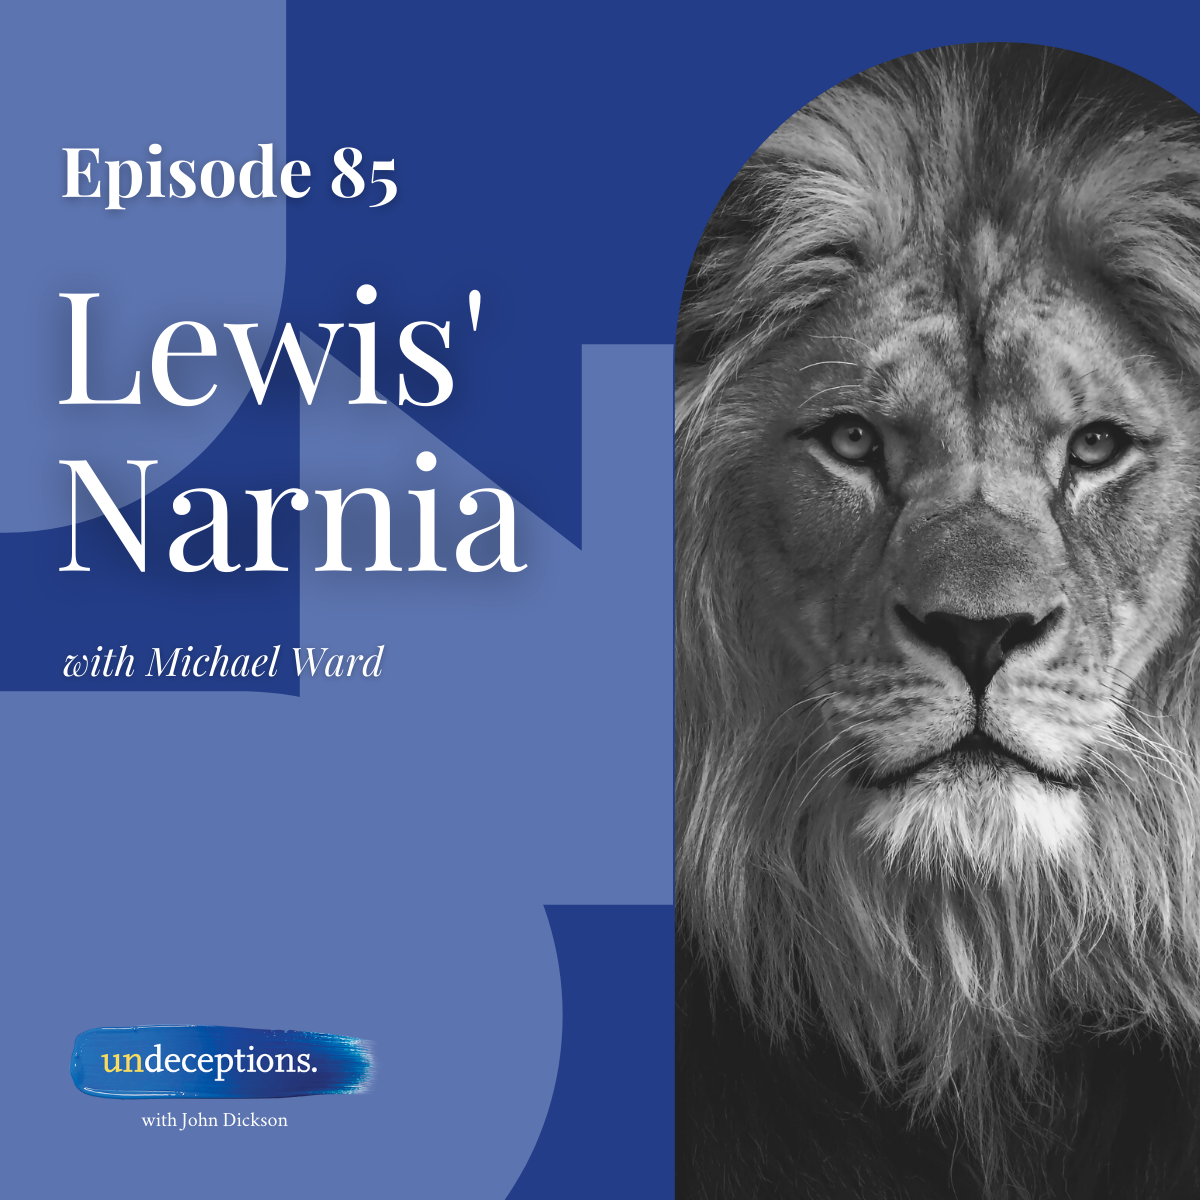 INTERTEXTUALITY: PASSION OF THE CHRIST AND NARNIA: THE LION, THE